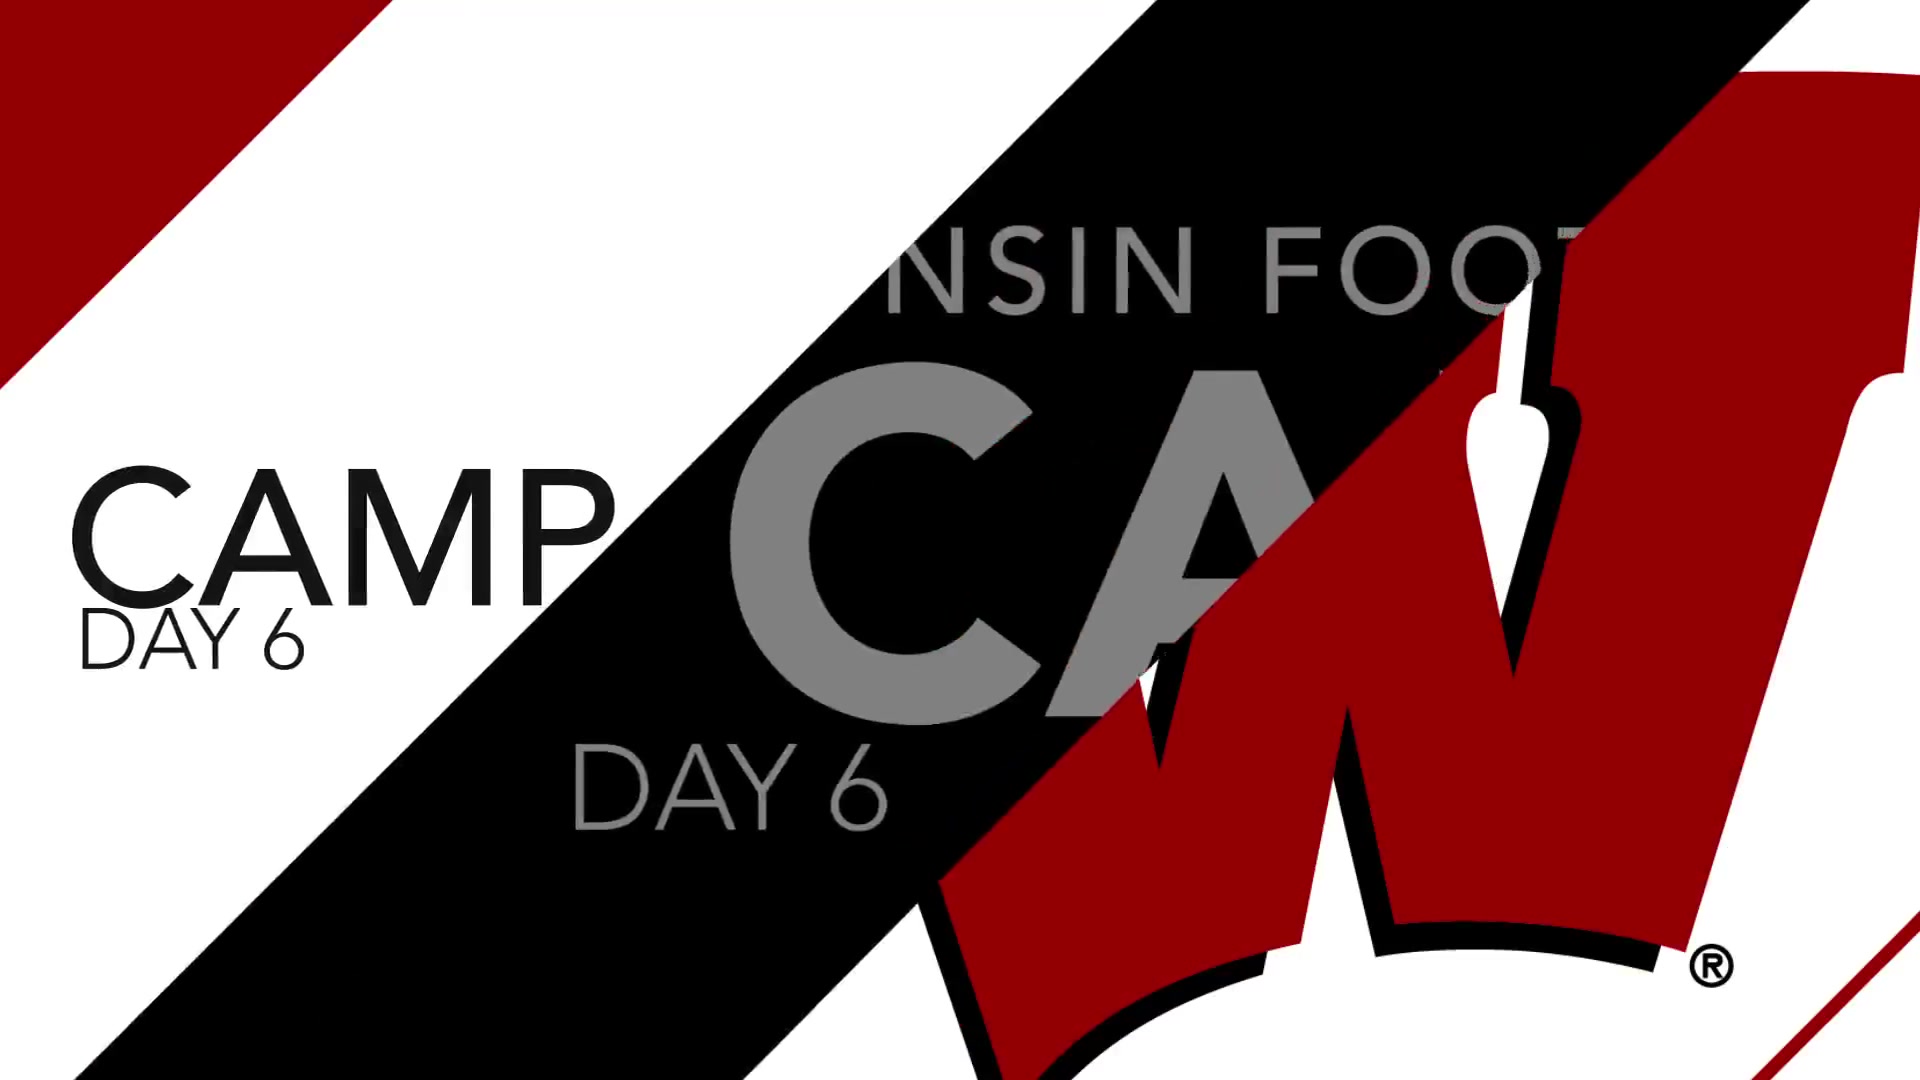 Wisconsin Football Fall Camp 2015: Day 6